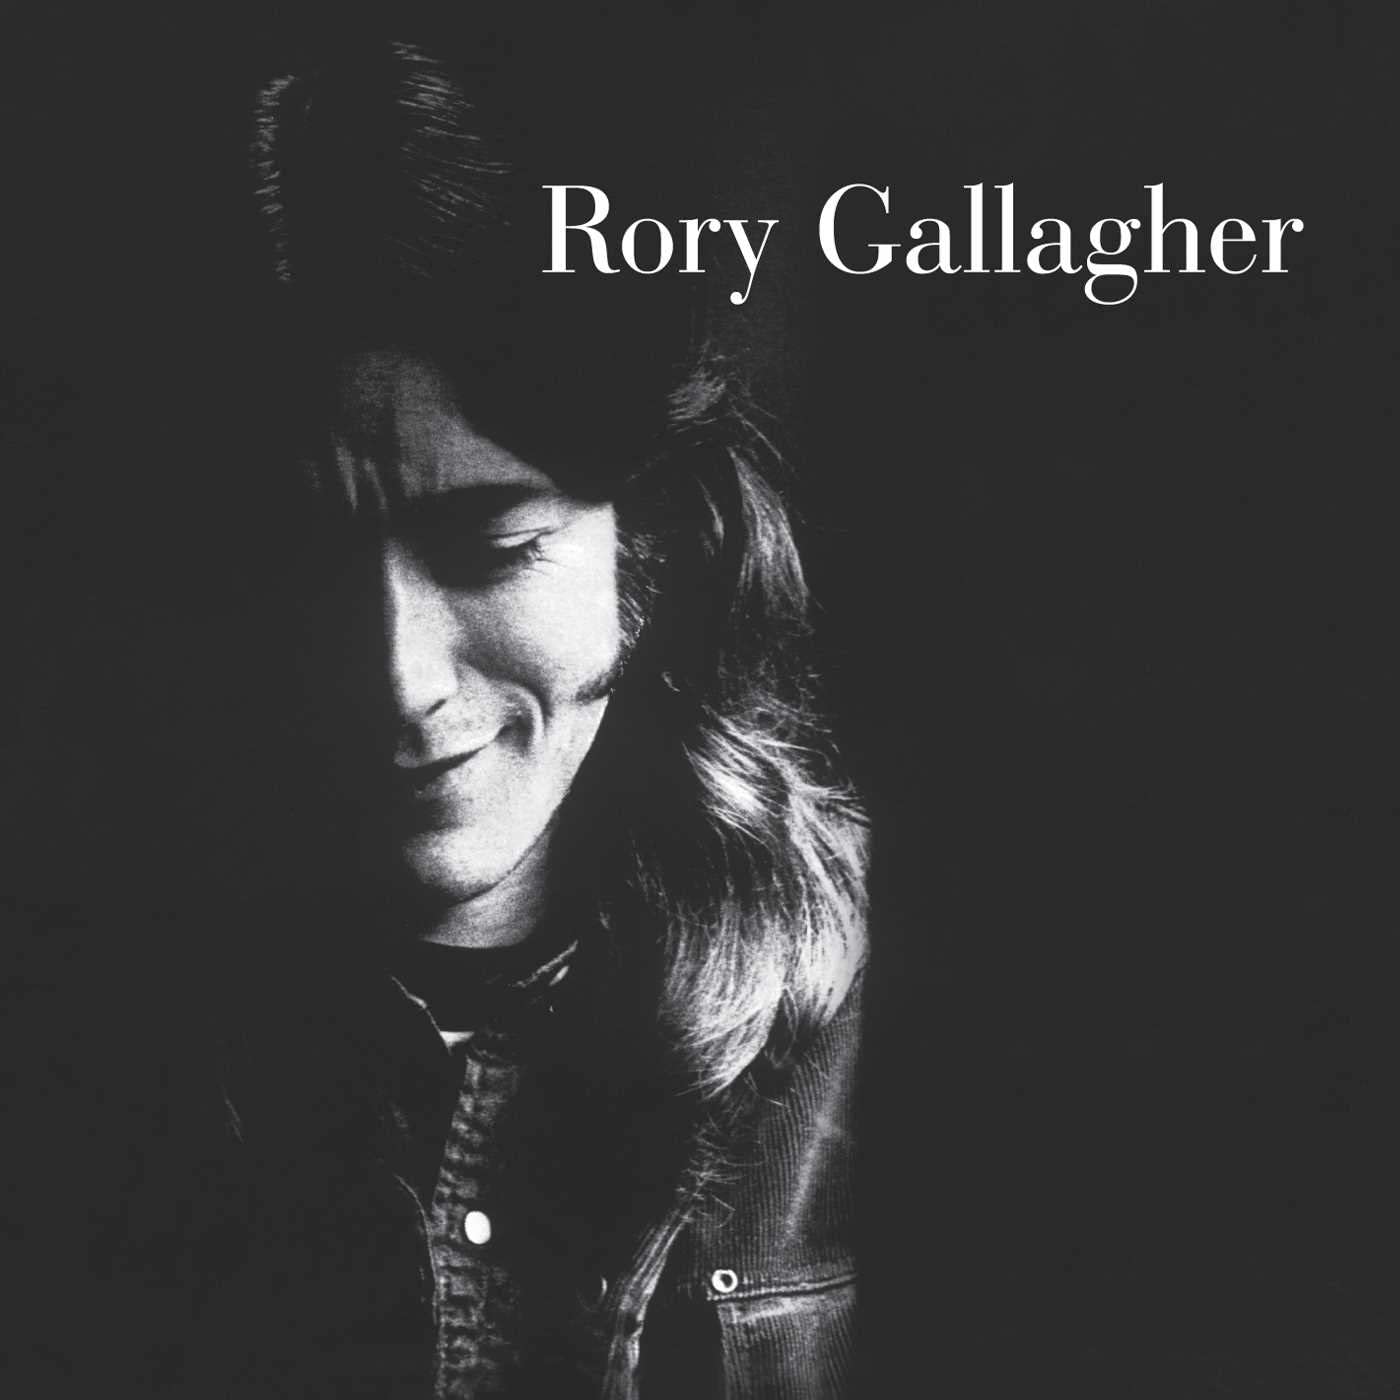 Rory Gallagher – Rory Gallagher cover album